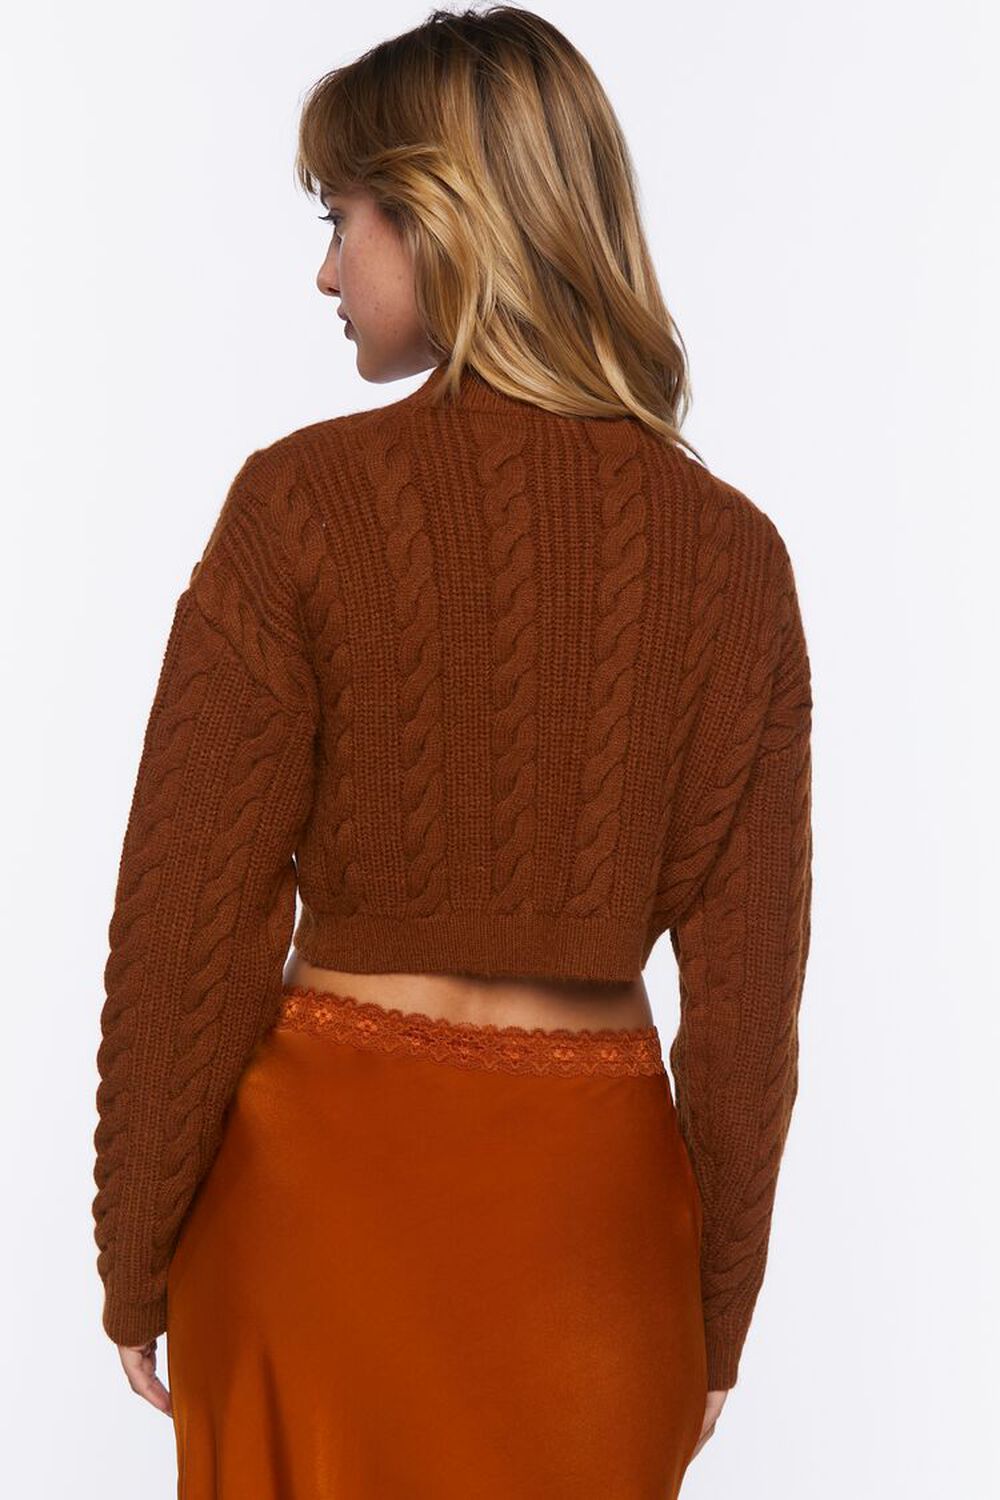 RUST Cropped Cable Knit Sweater, image 3